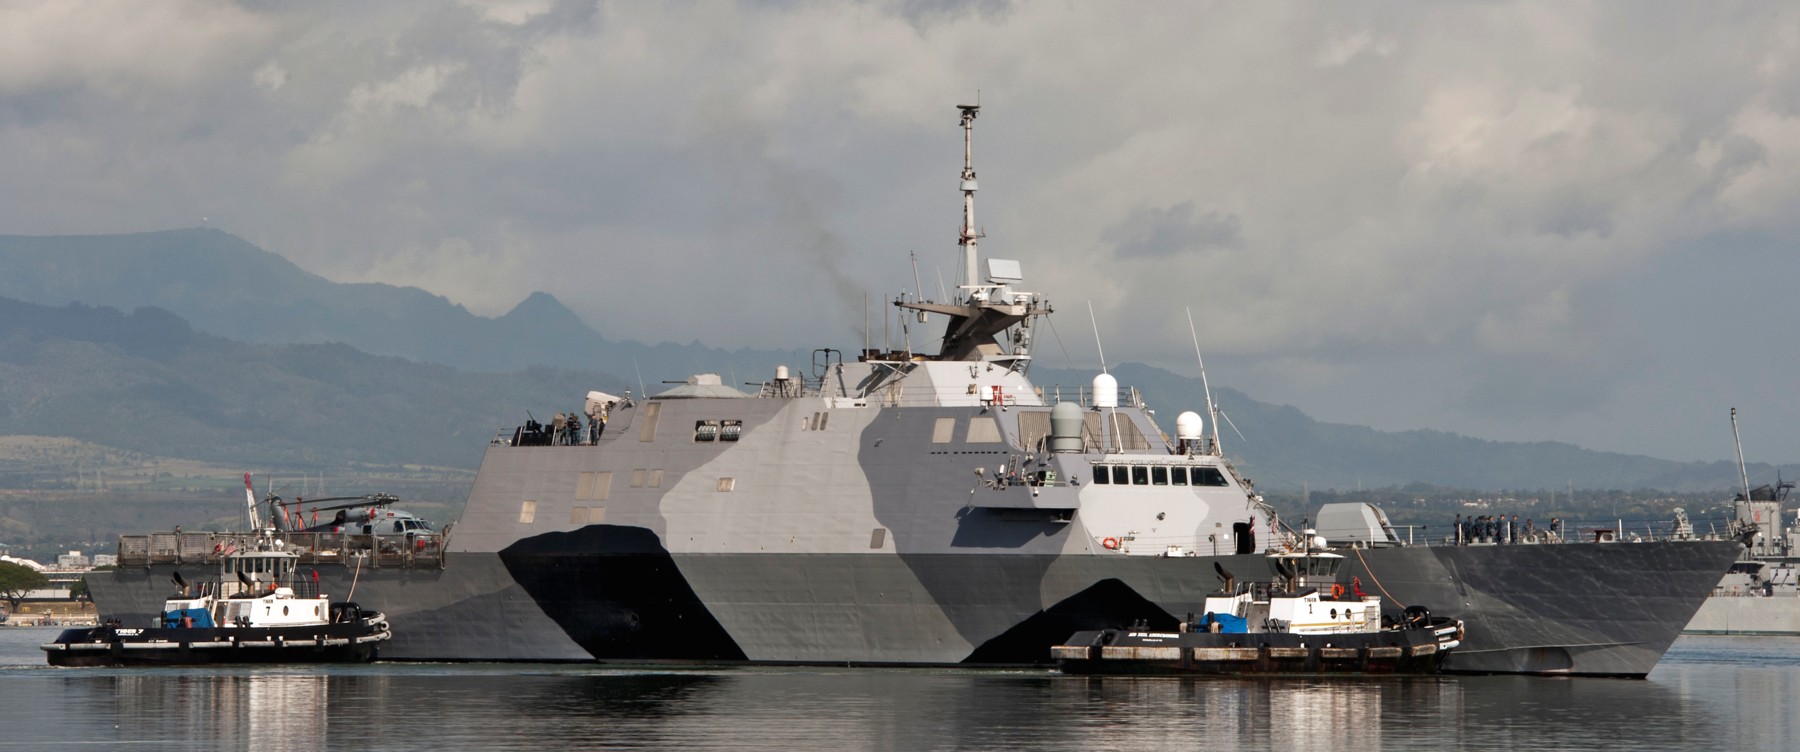 lcs-1 uss freedom class littoral combat ship us navy 42